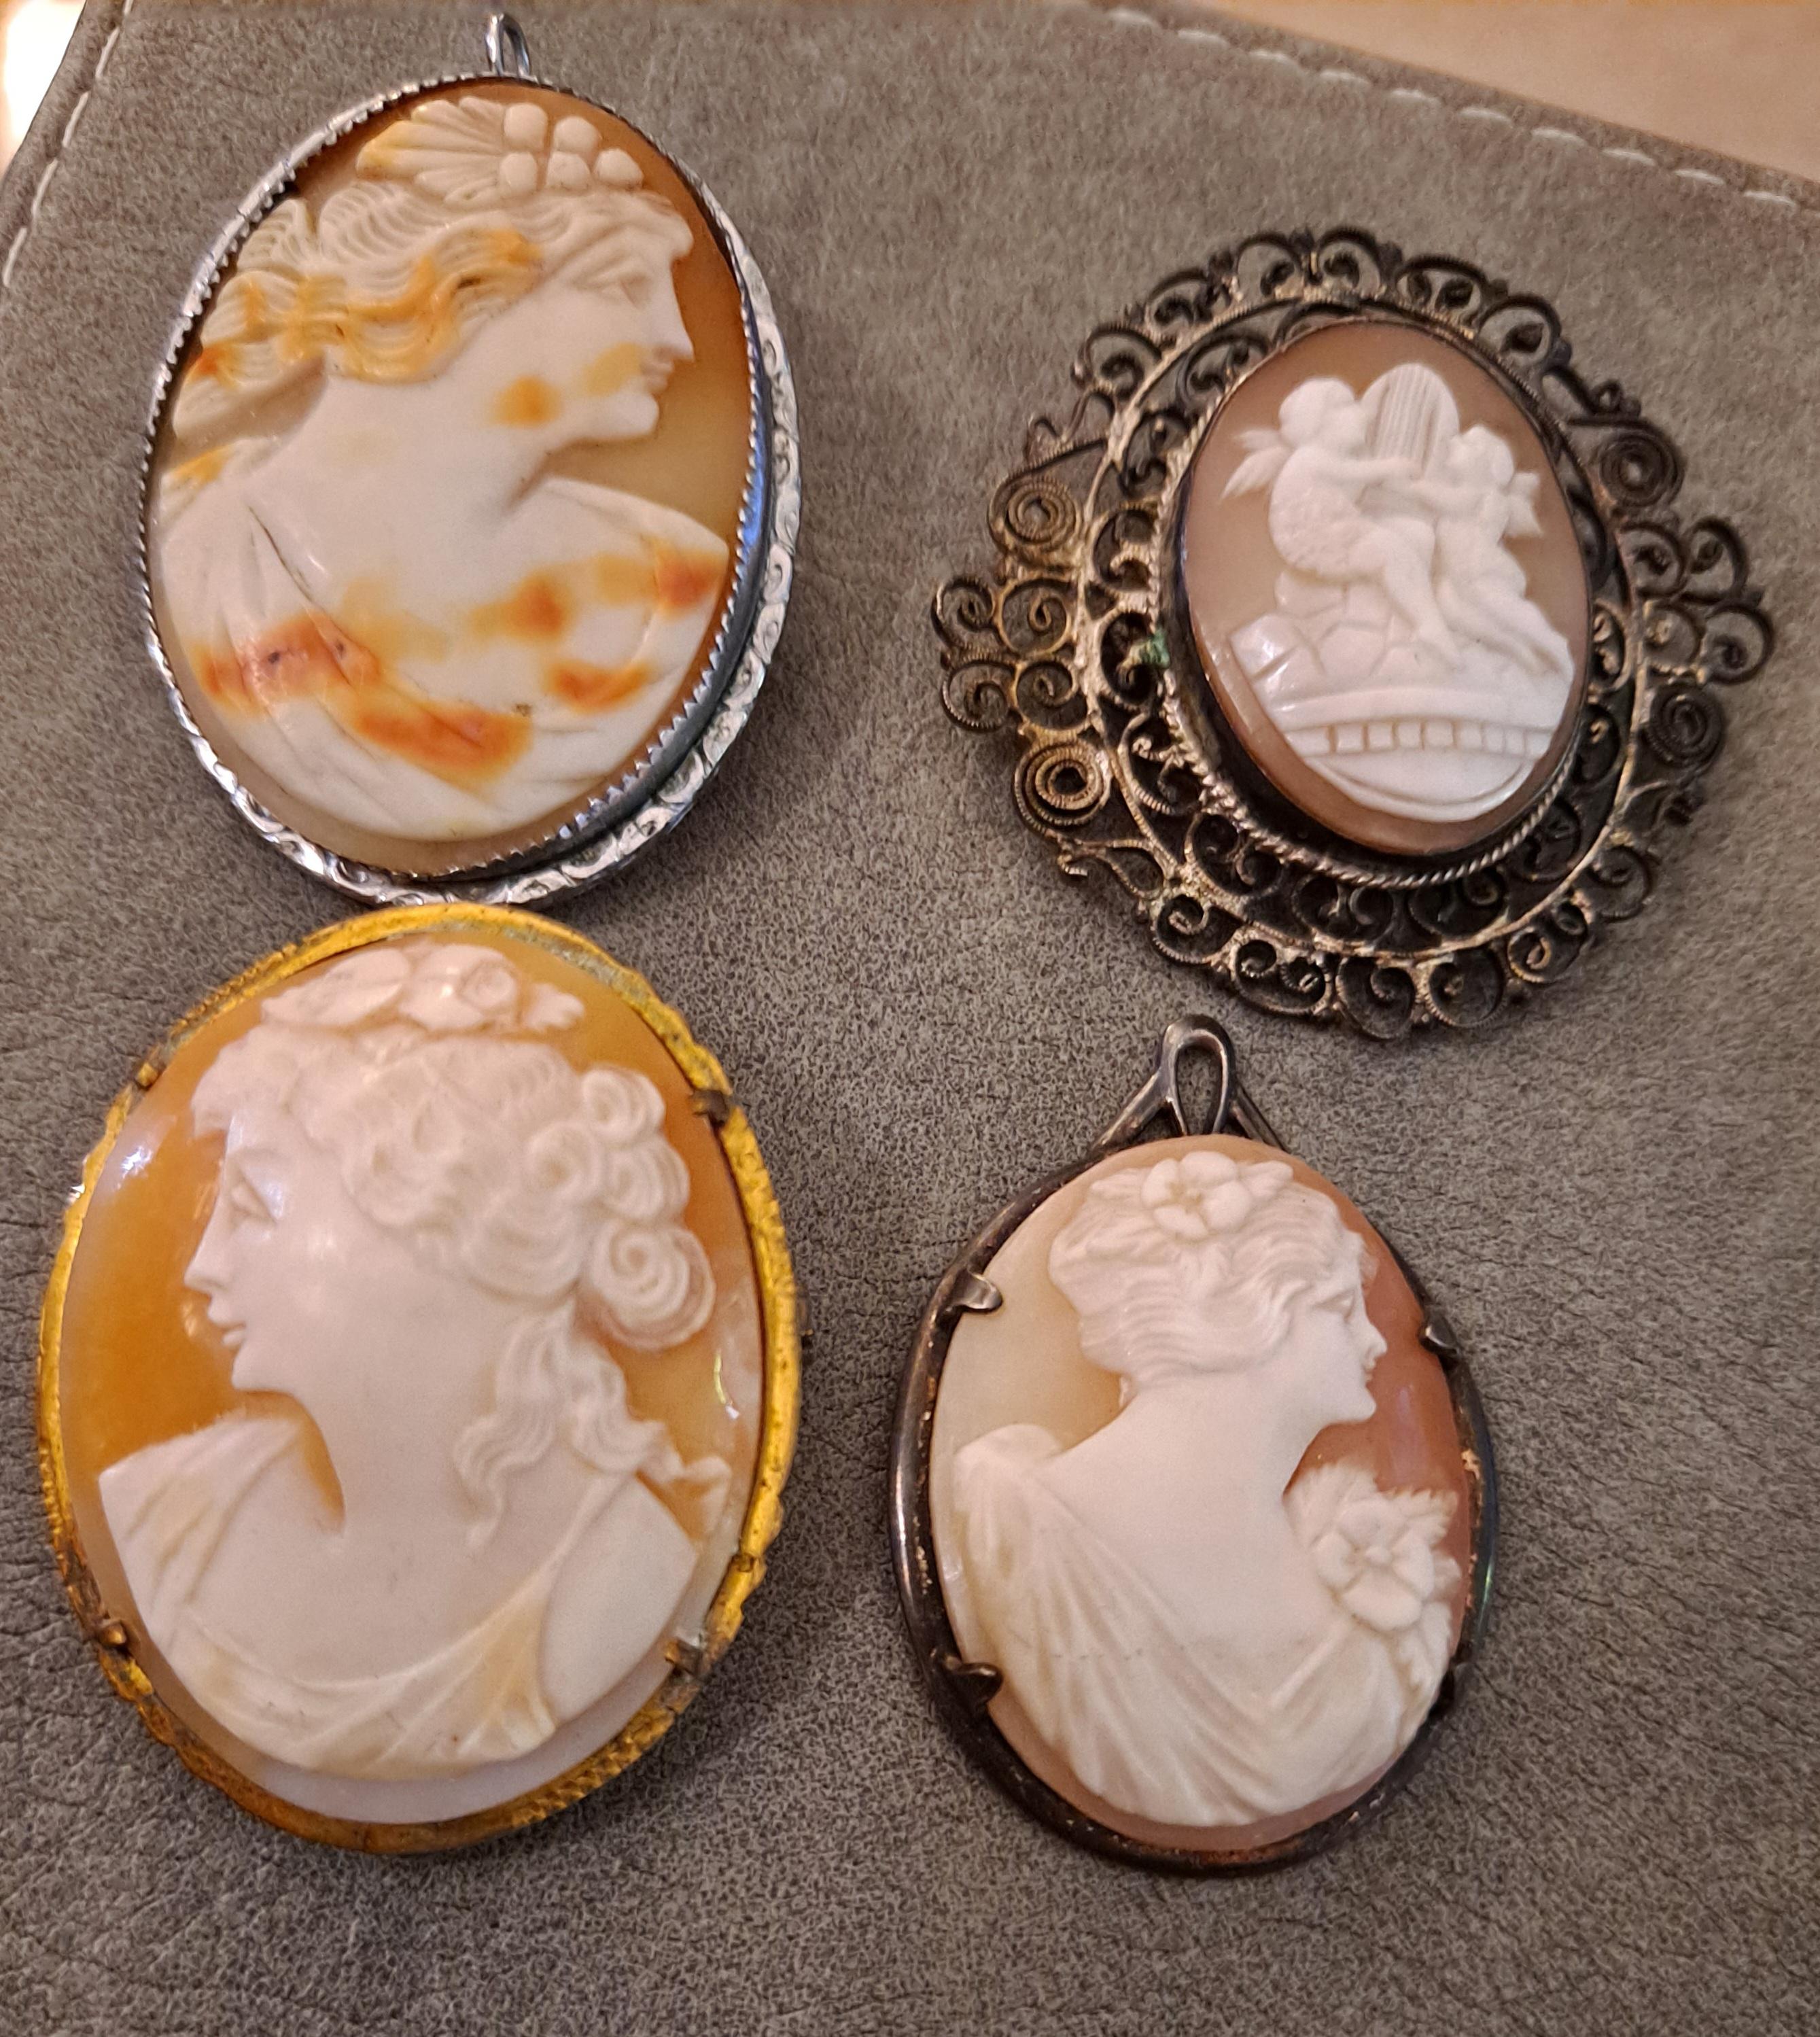 Group of 4 High Relief Cameo Pins/Pendents Carved from Bull Mouth Shell

Unmarked

Silver Settings

2.5mm x 4mm 
4mm x 4mm
2 pieces: 3mm x 3mm